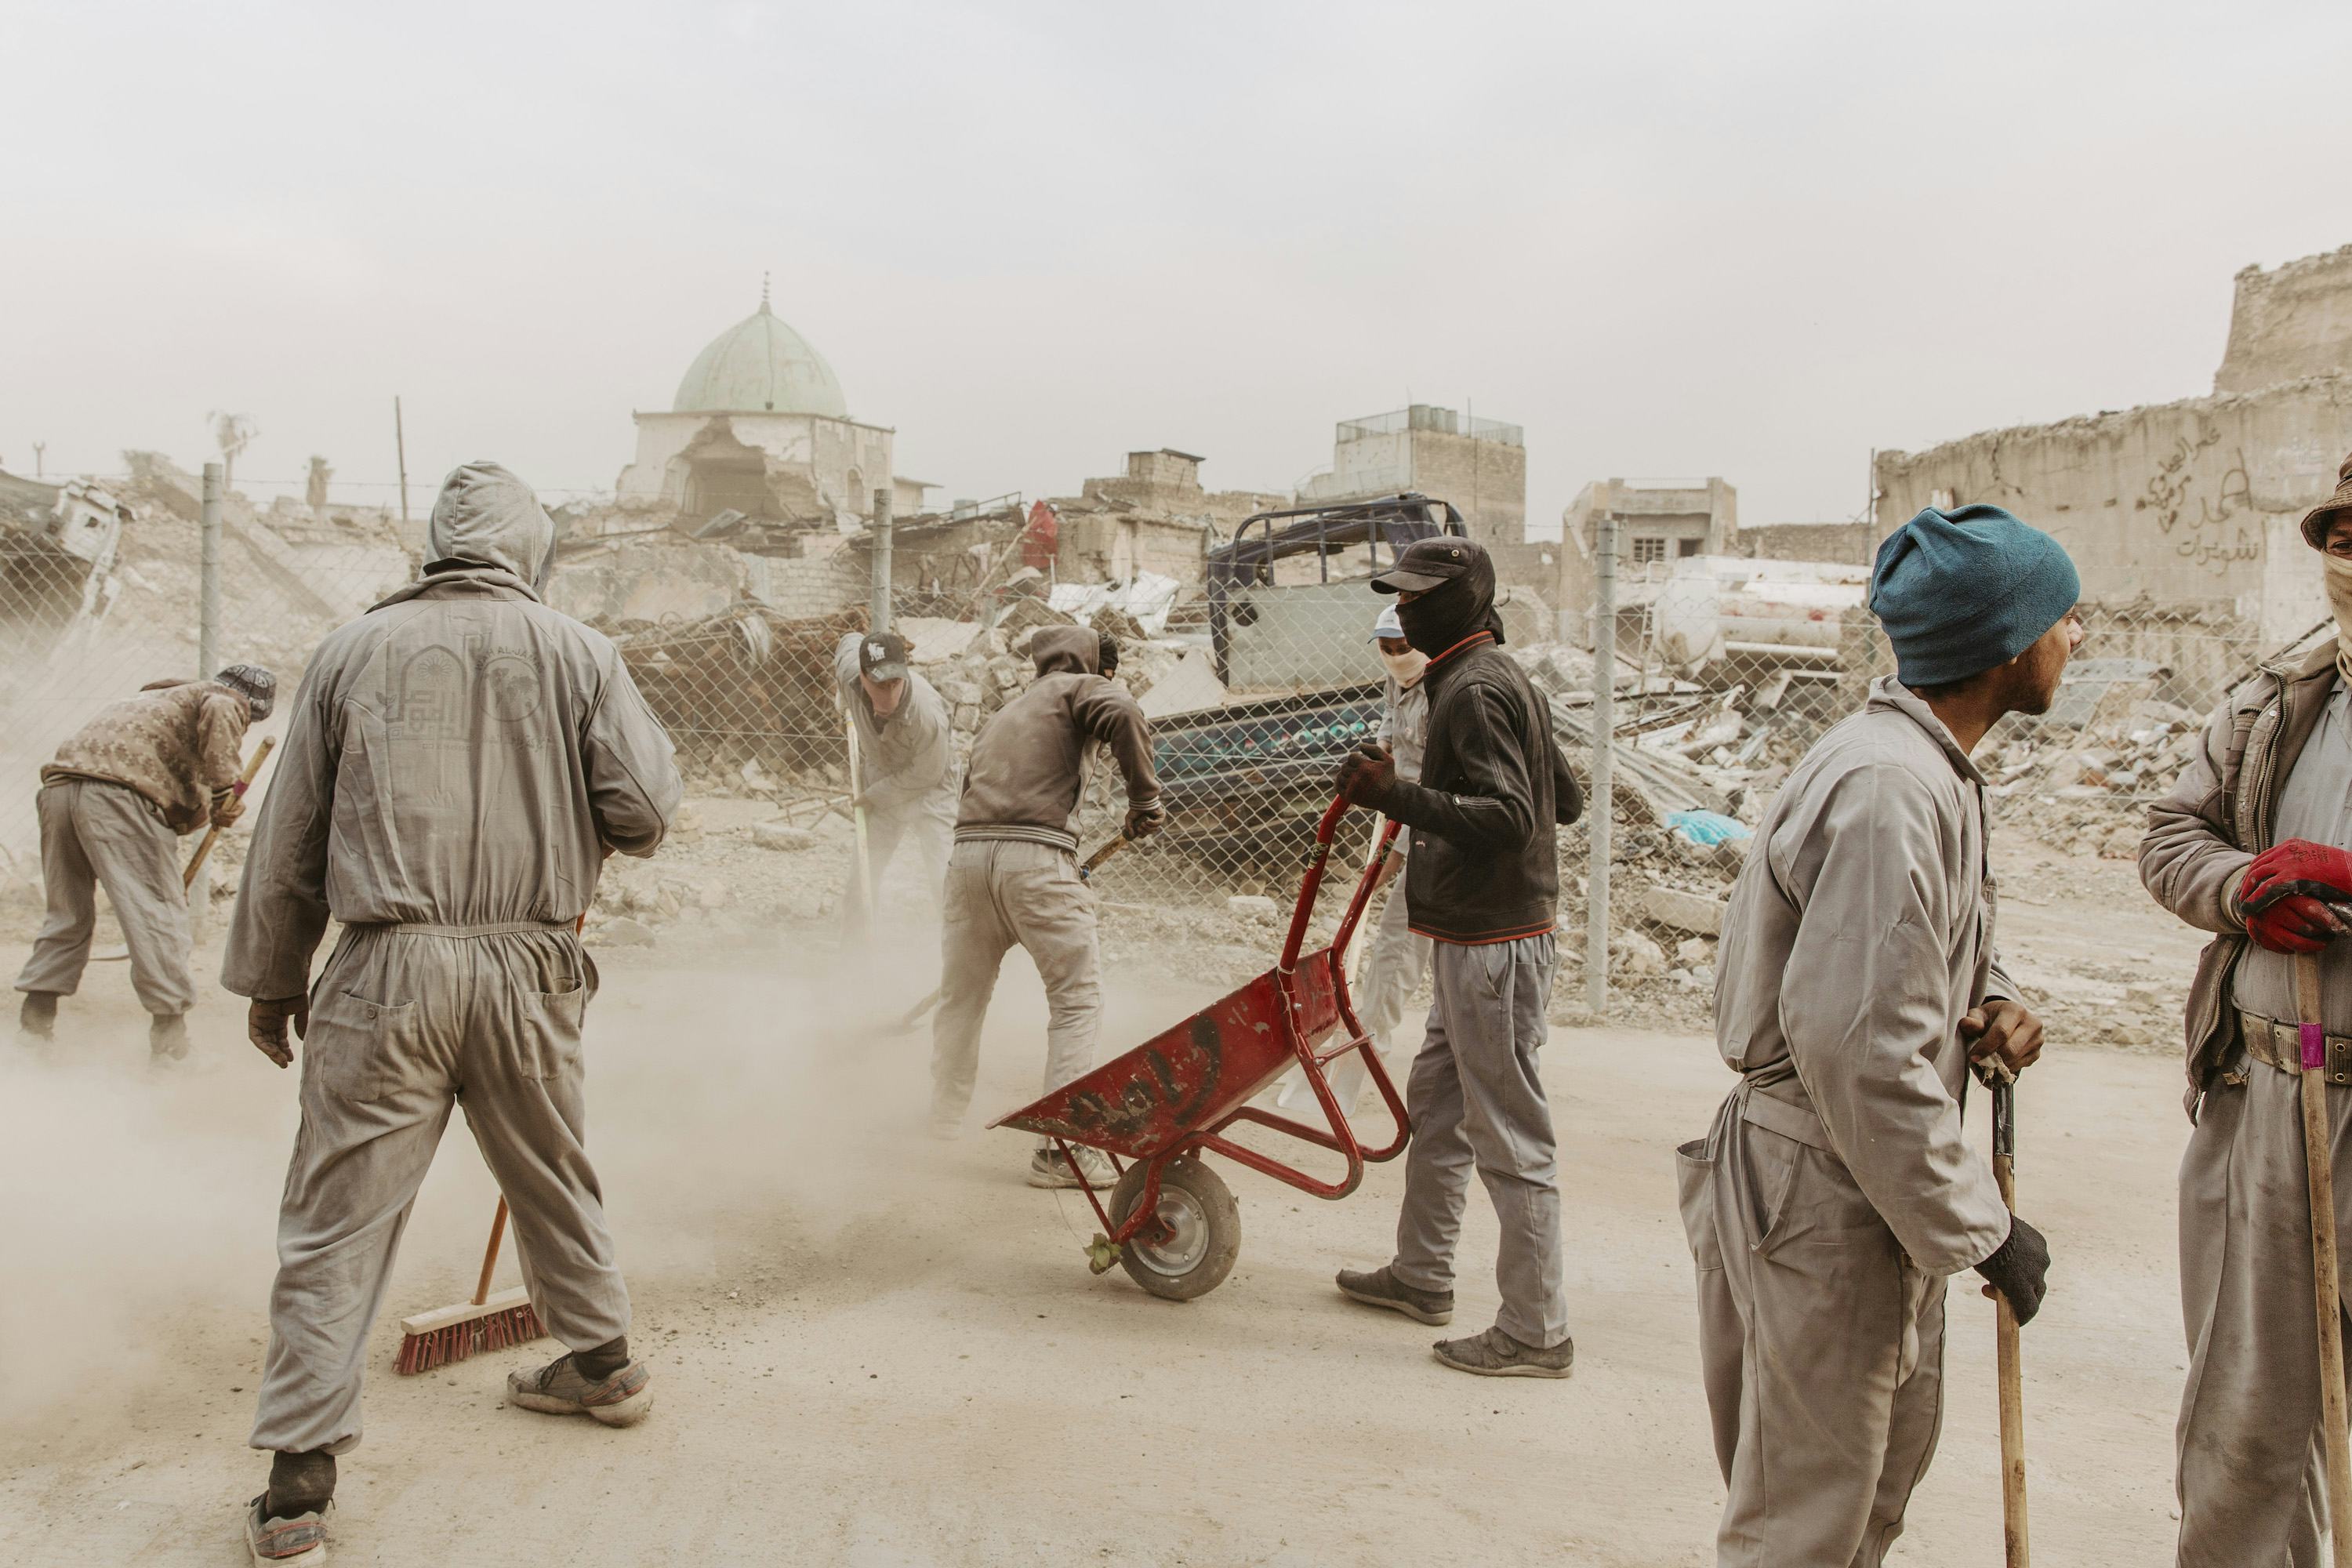 Image of various men in grey boilersuits cleaning up a dusty road, showing a red wheelbarrow in the middle and destroyed buildings in the background.